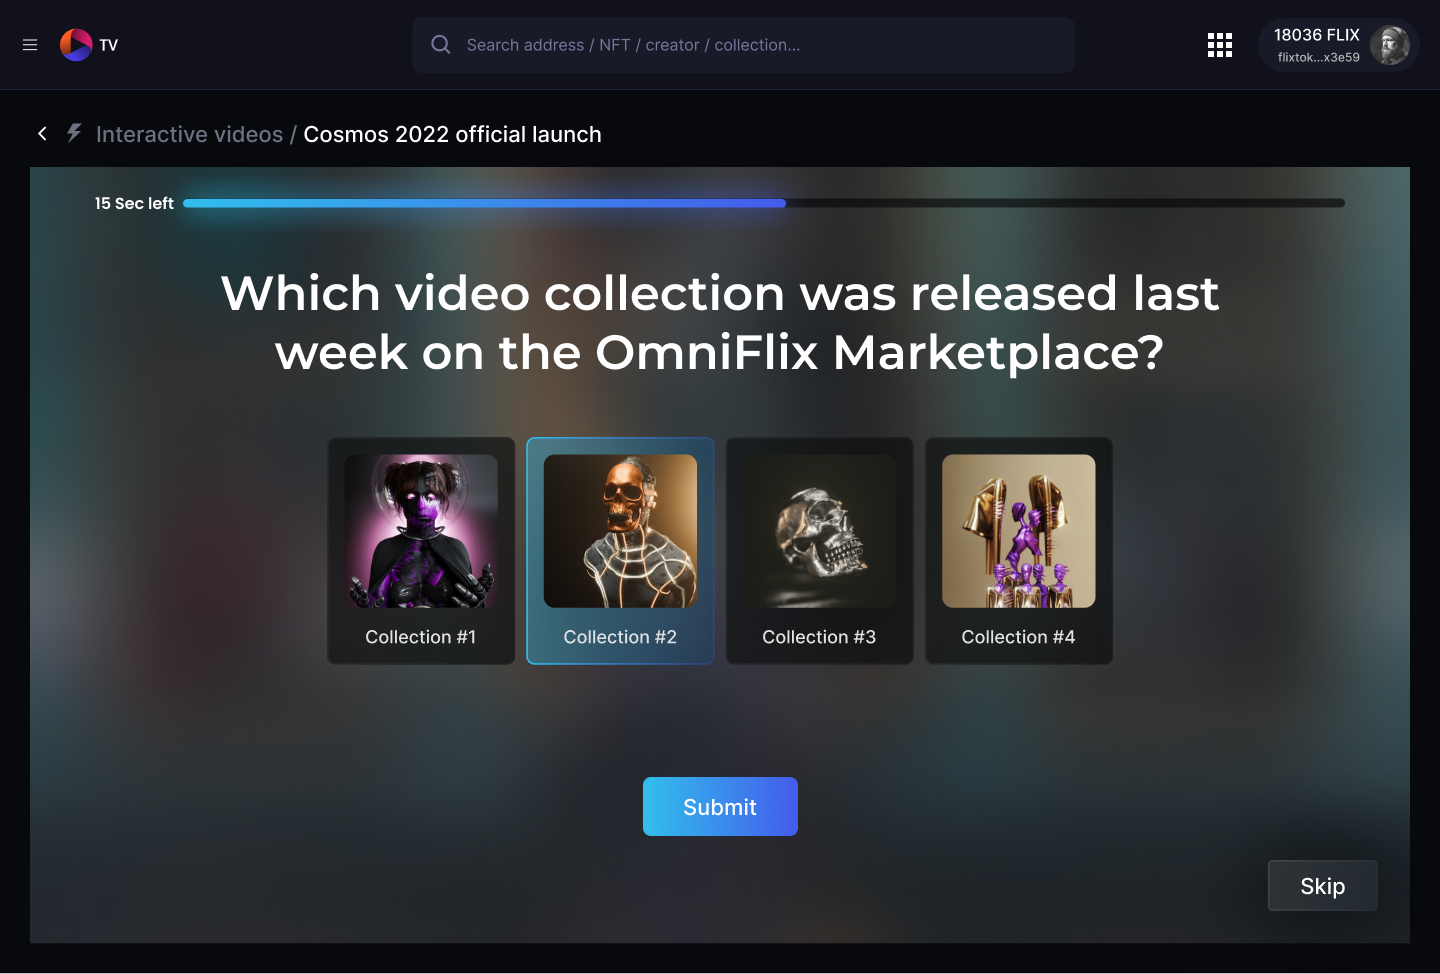 OmniFlix TV (v1) sneak peek - Interaction with Images and short text